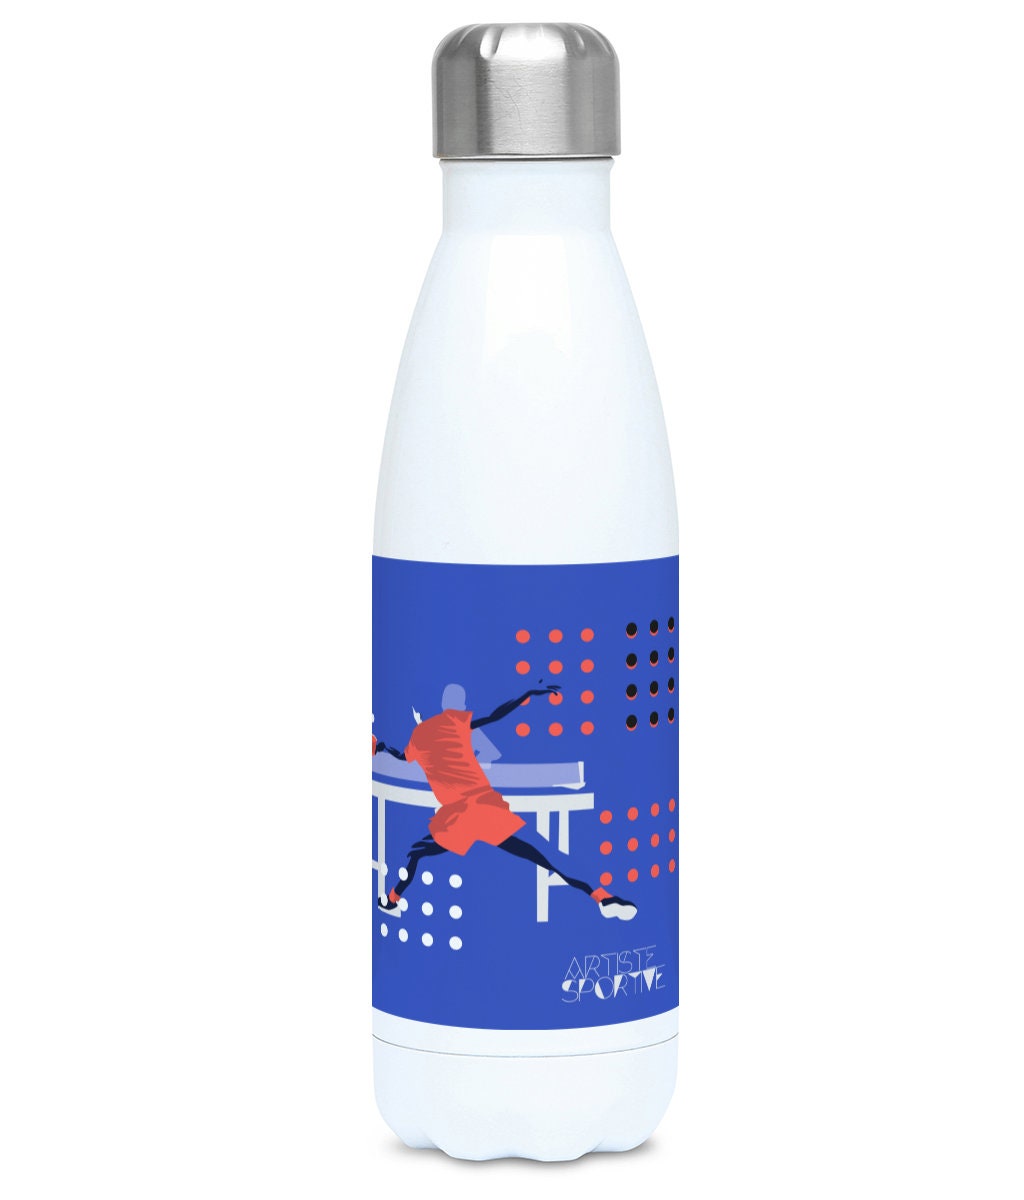 Ping Pong insulated bottle "Table tennis in purple blue" - Customizable